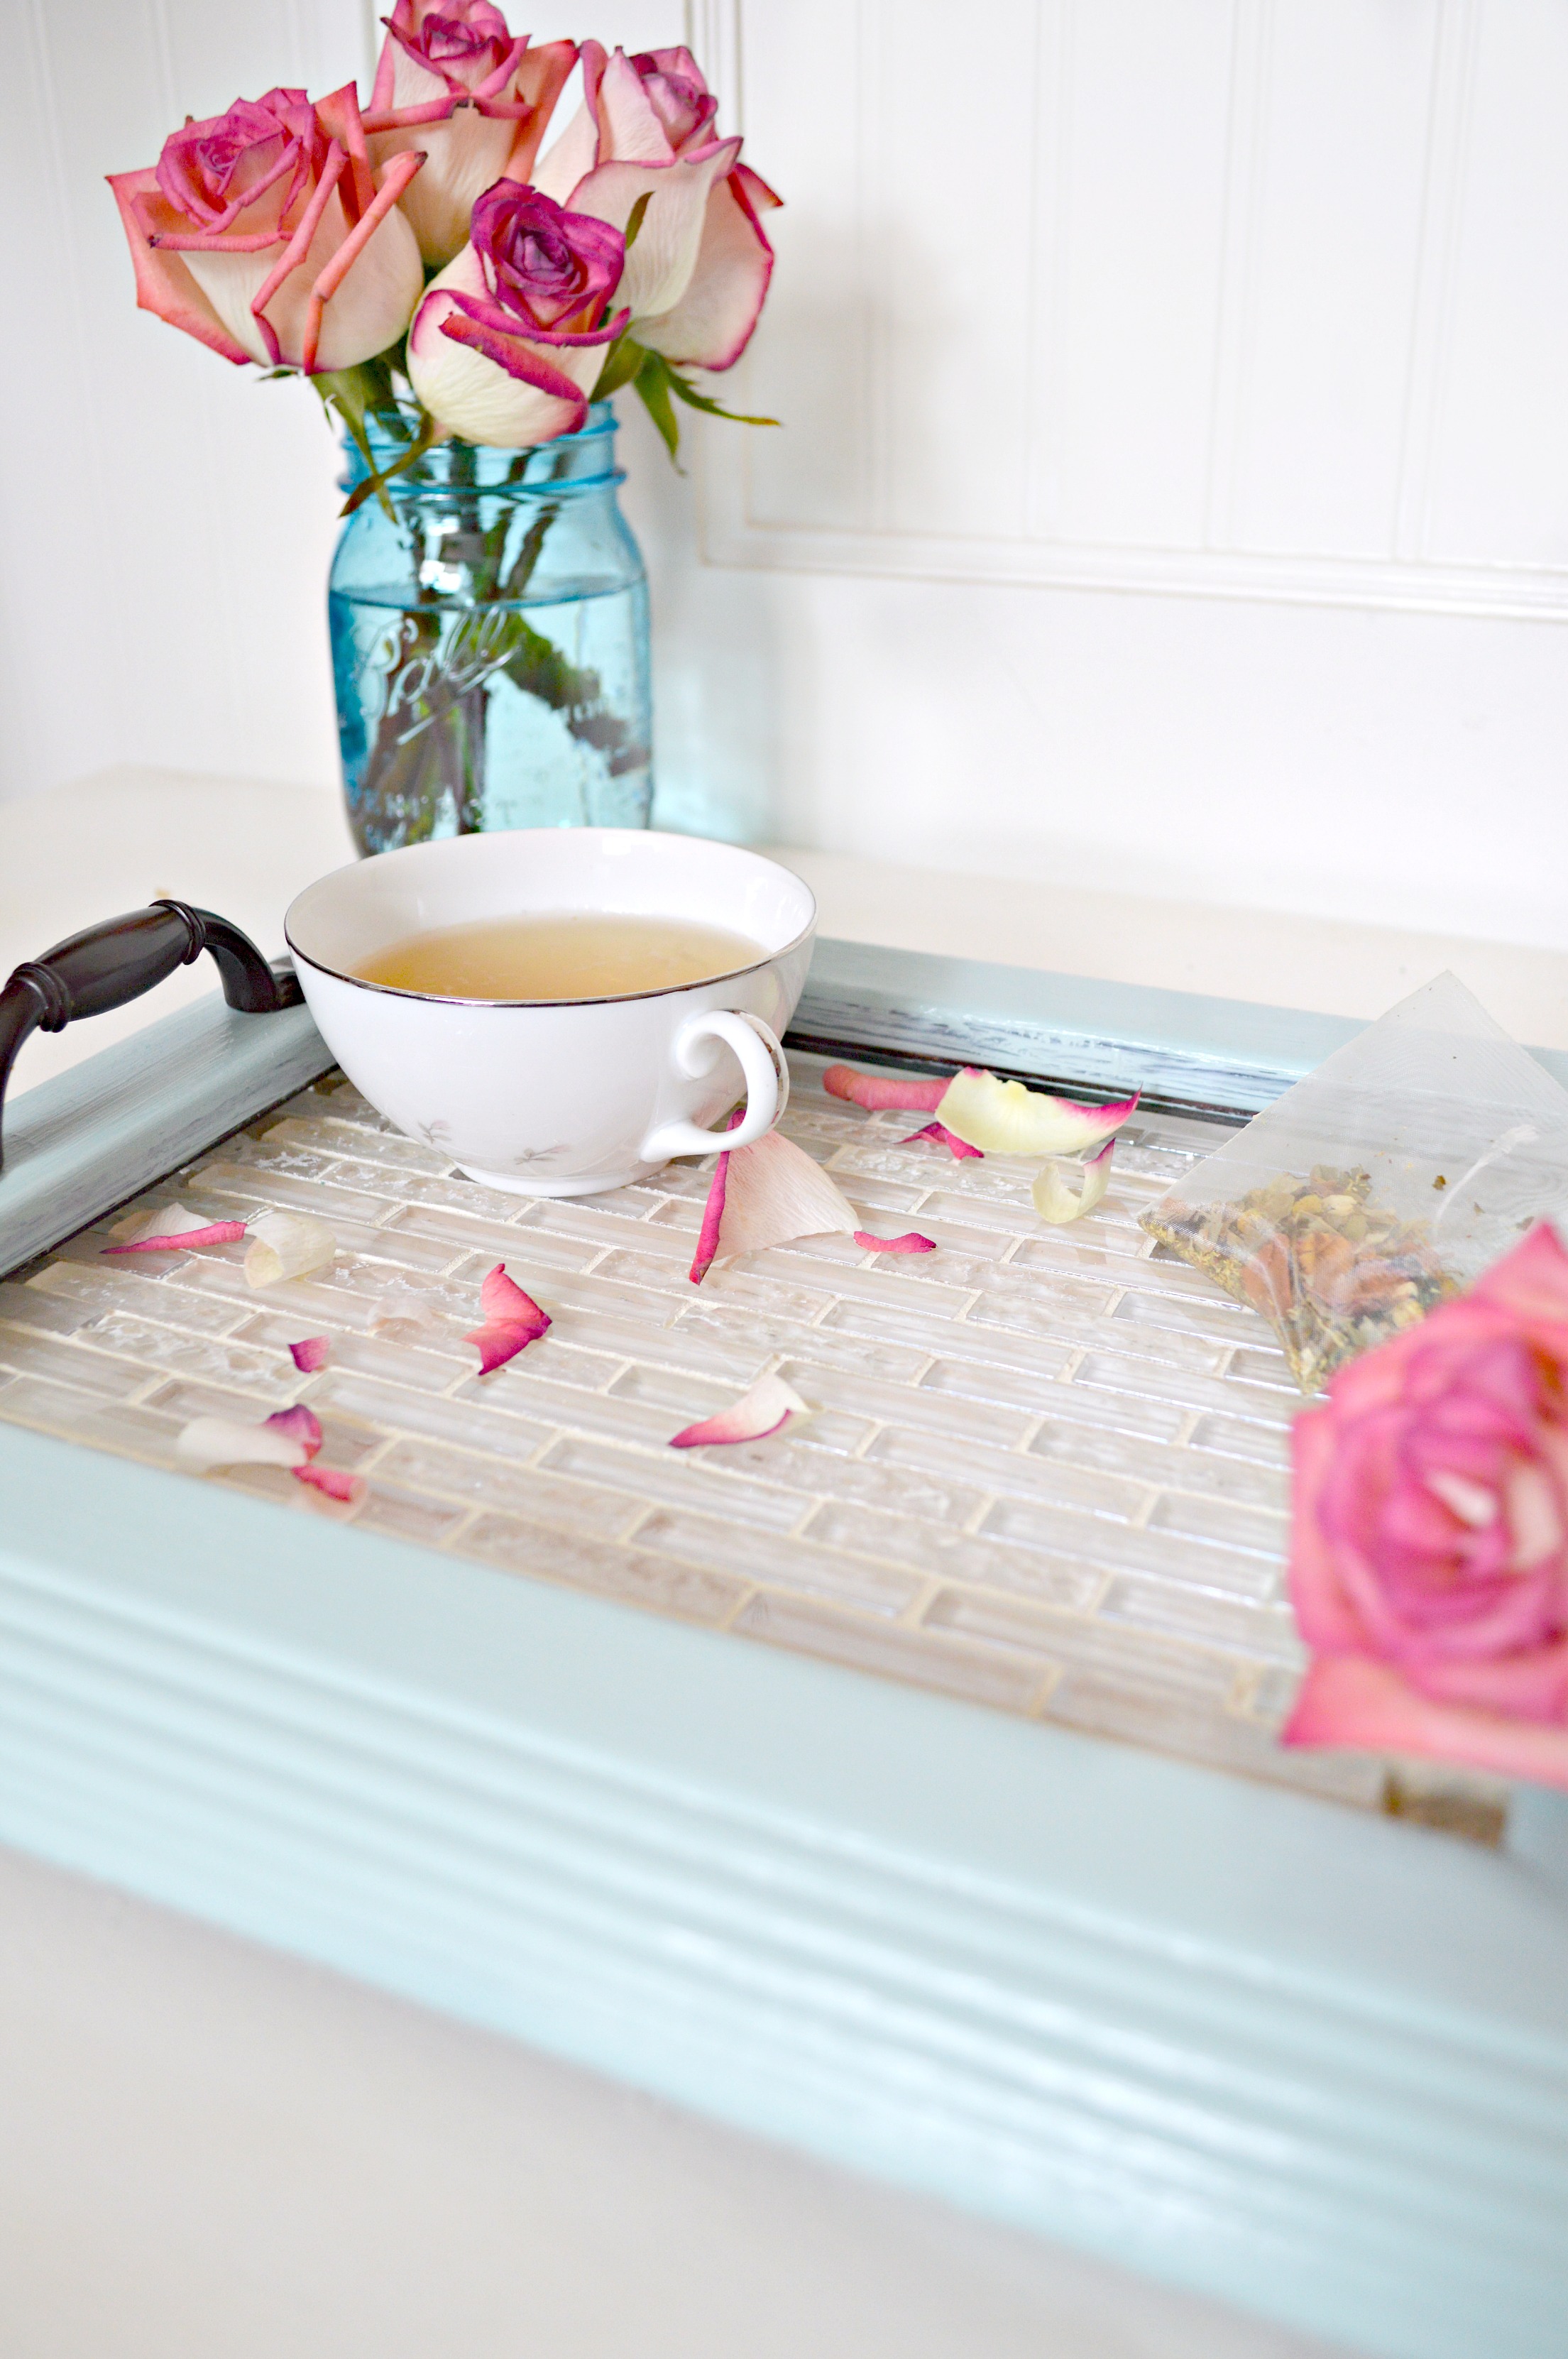 Turn A Picture Frame Into A Tiled Serving Tray